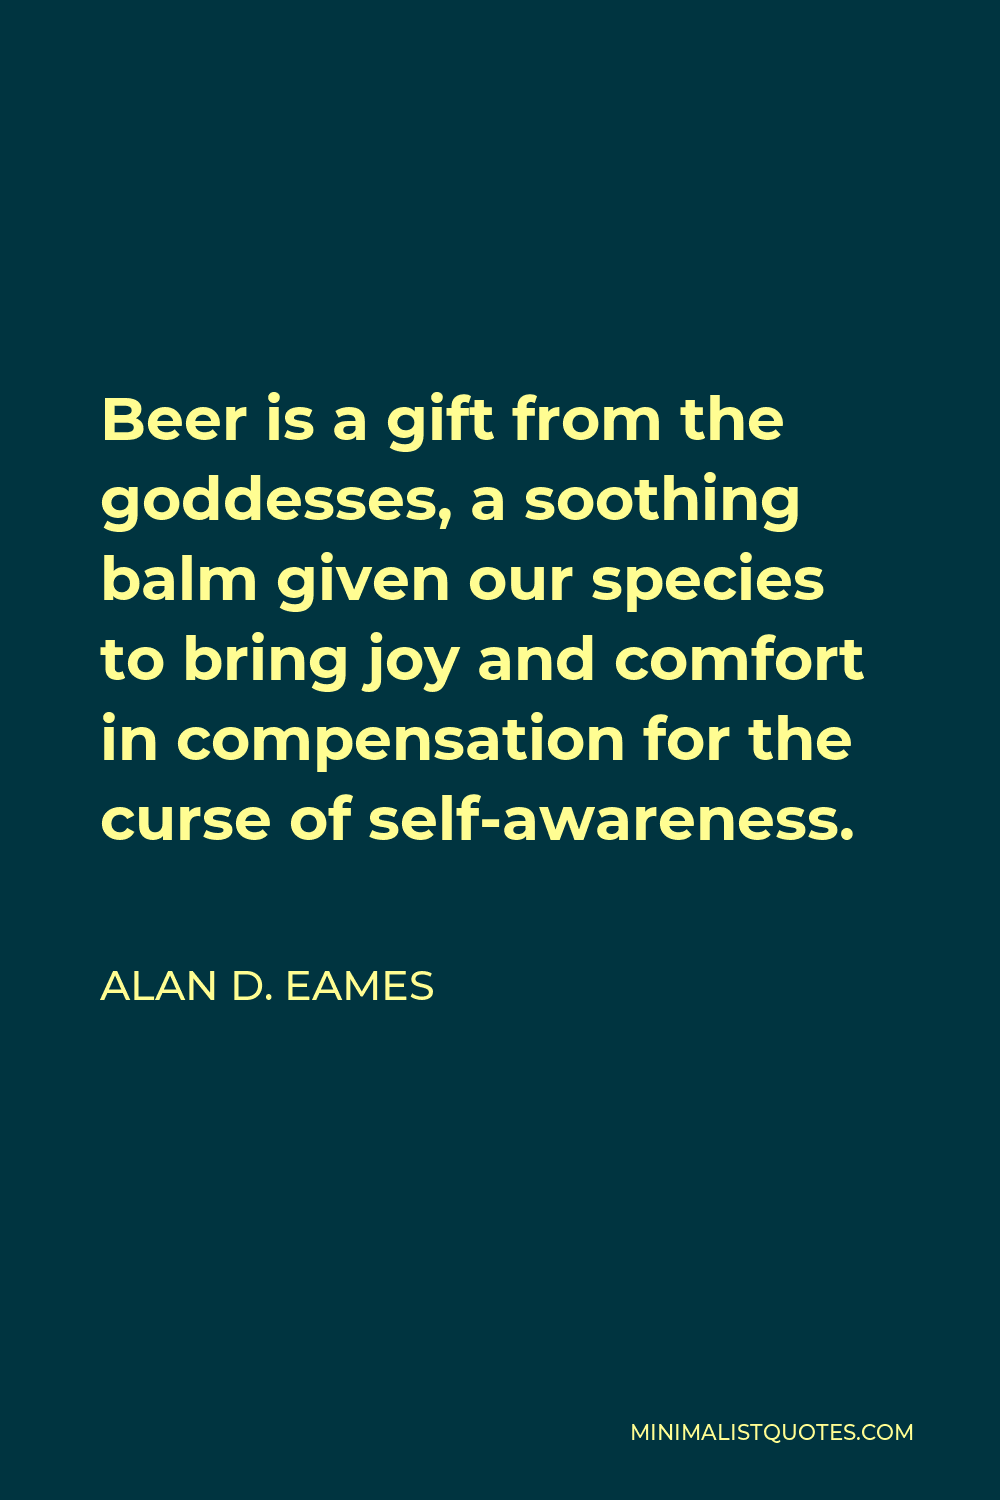 Alan D. Eames Quote - Beer is a gift from the goddesses, a soothing balm given our species to bring joy and comfort in compensation for the curse of self-awareness.